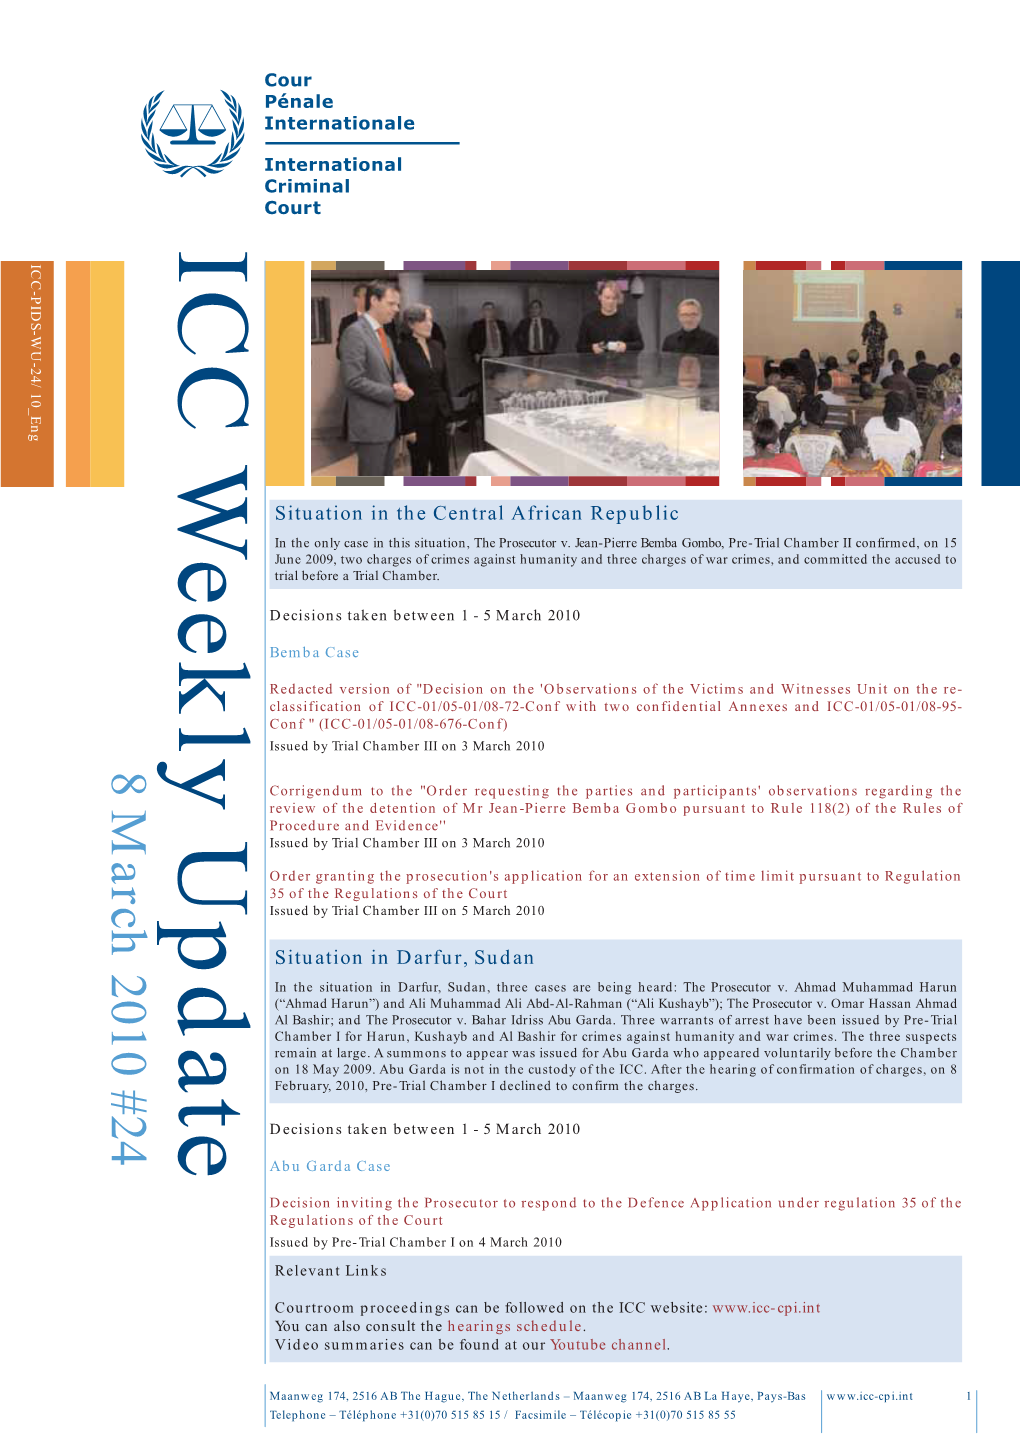 ICC Weekly Update, 8 March 2010